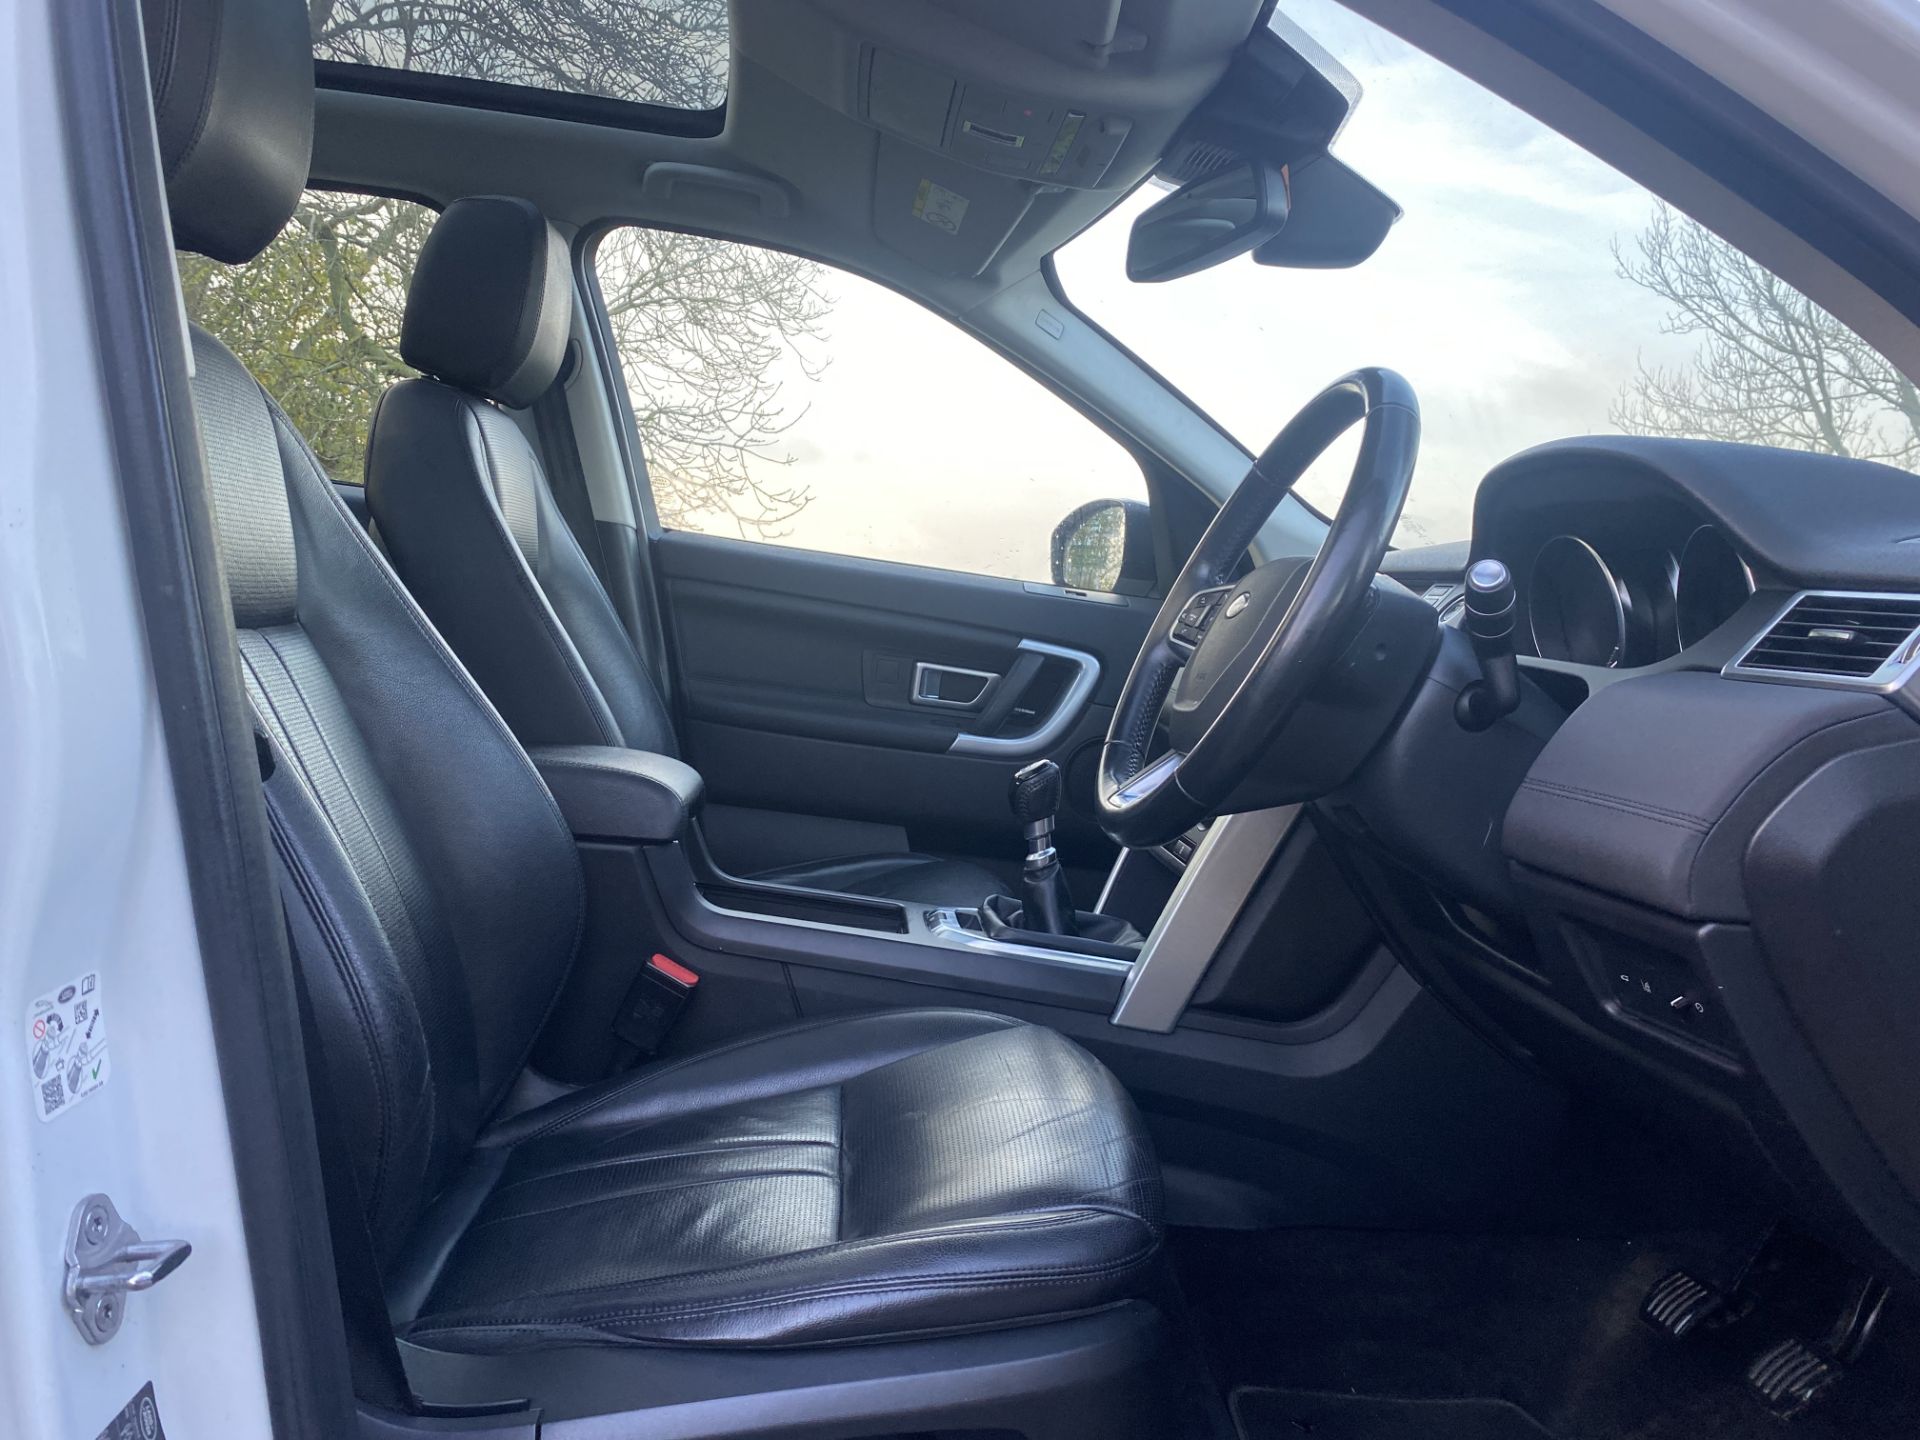 (ON SALE) LANDROVER DISCOVERY SPORT "HSE" 18 REG - 1 OWNER - LEATHER PANORAMIC ROOF - FULLY LOADED - - Image 27 of 37